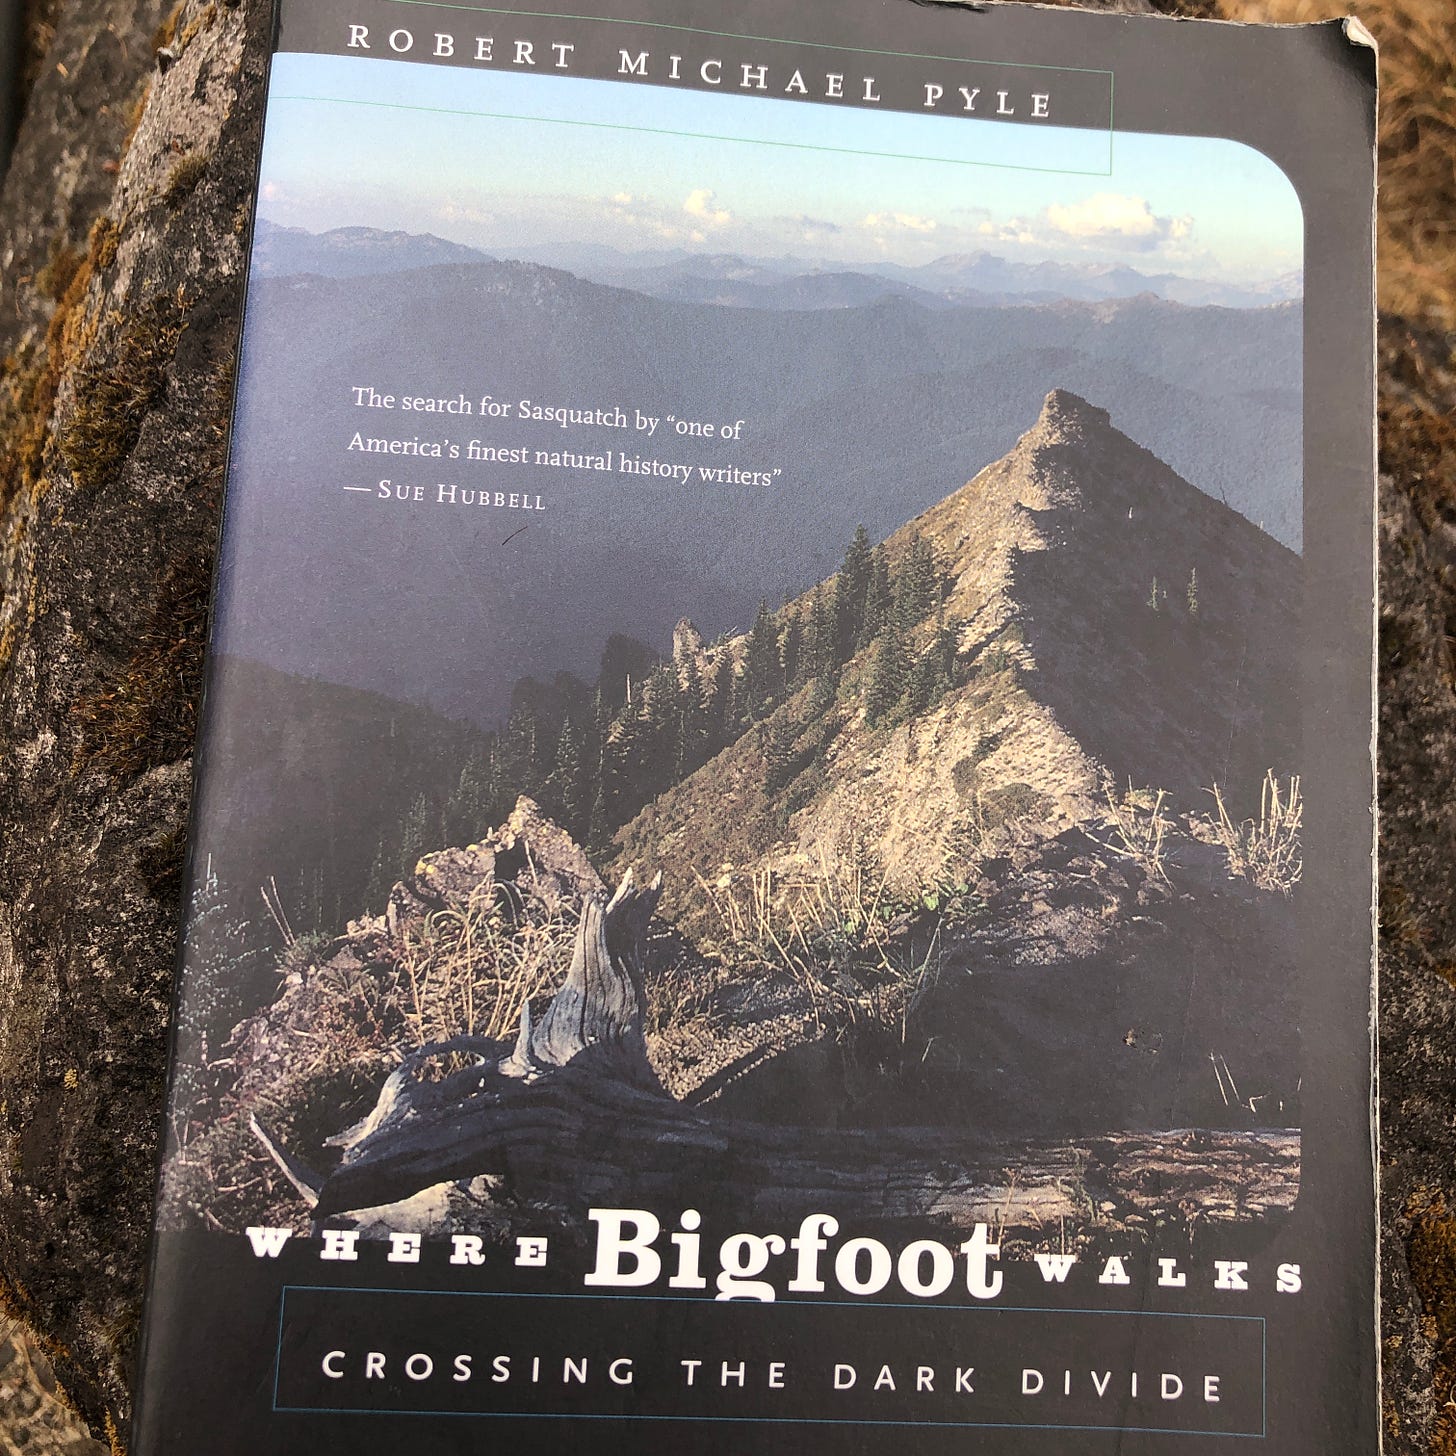 Paperback copy of “Where Bigfoot Walks,” by Robert Michael Pyle, on a rock.